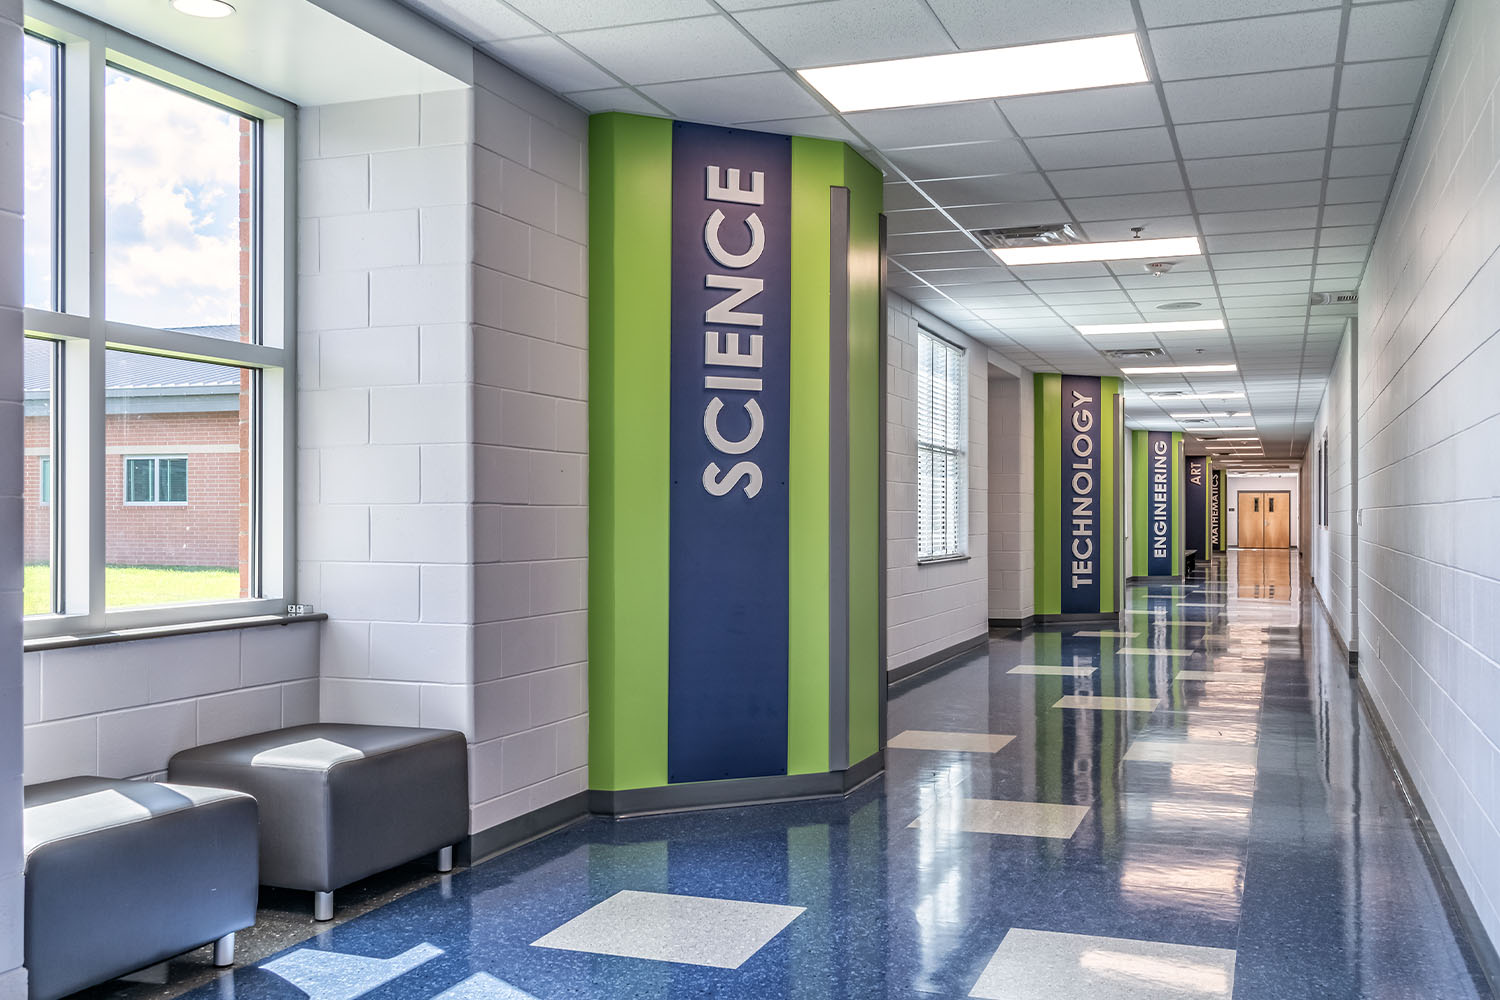 Hallway with text graphics for Science, Technology, Engineering, Art, Mathematics